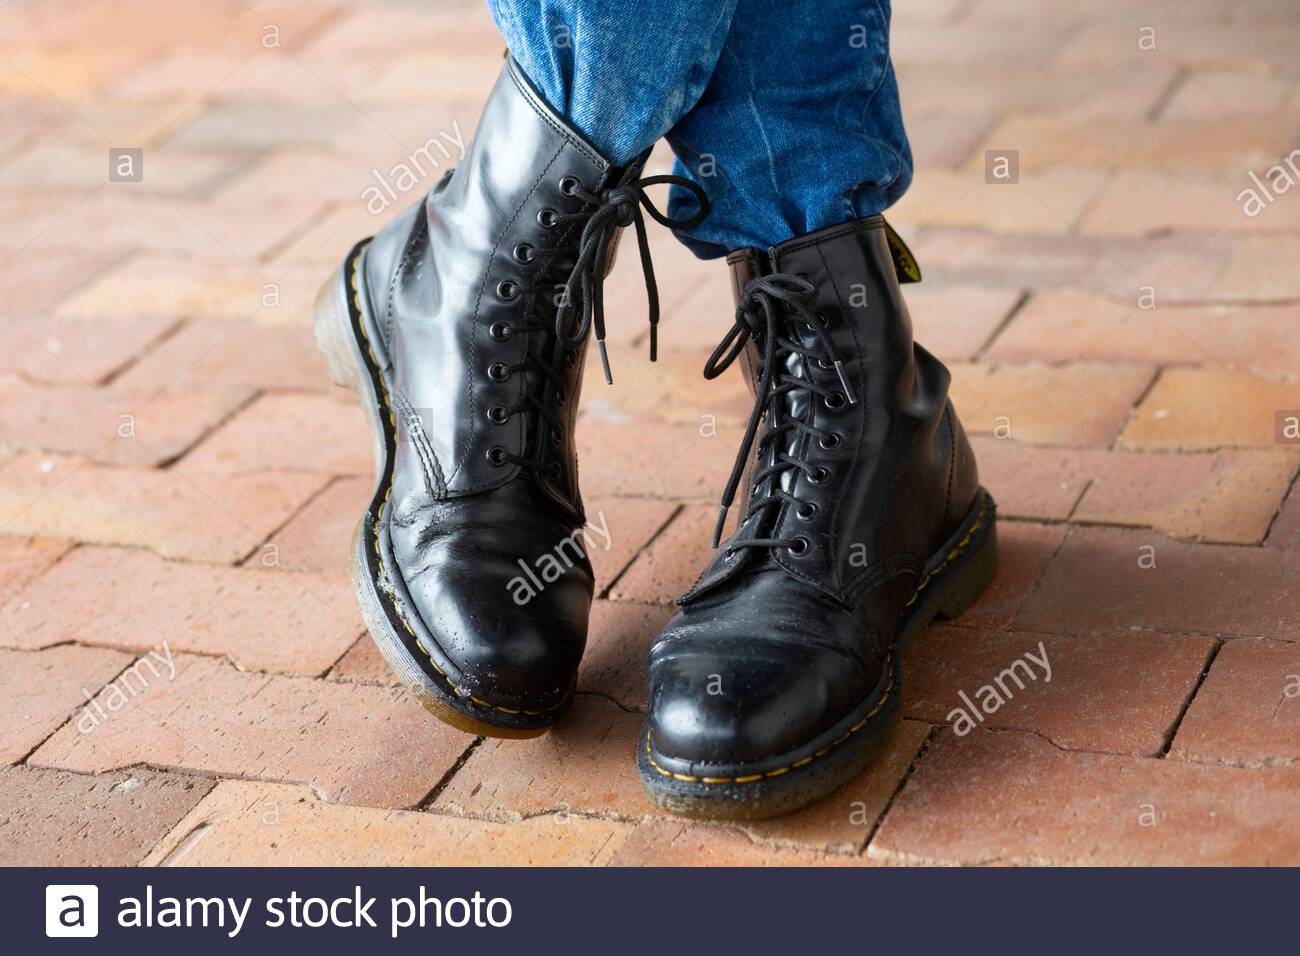 Black strong Dr Marten boots in snow on a winter's day. Stock Photo